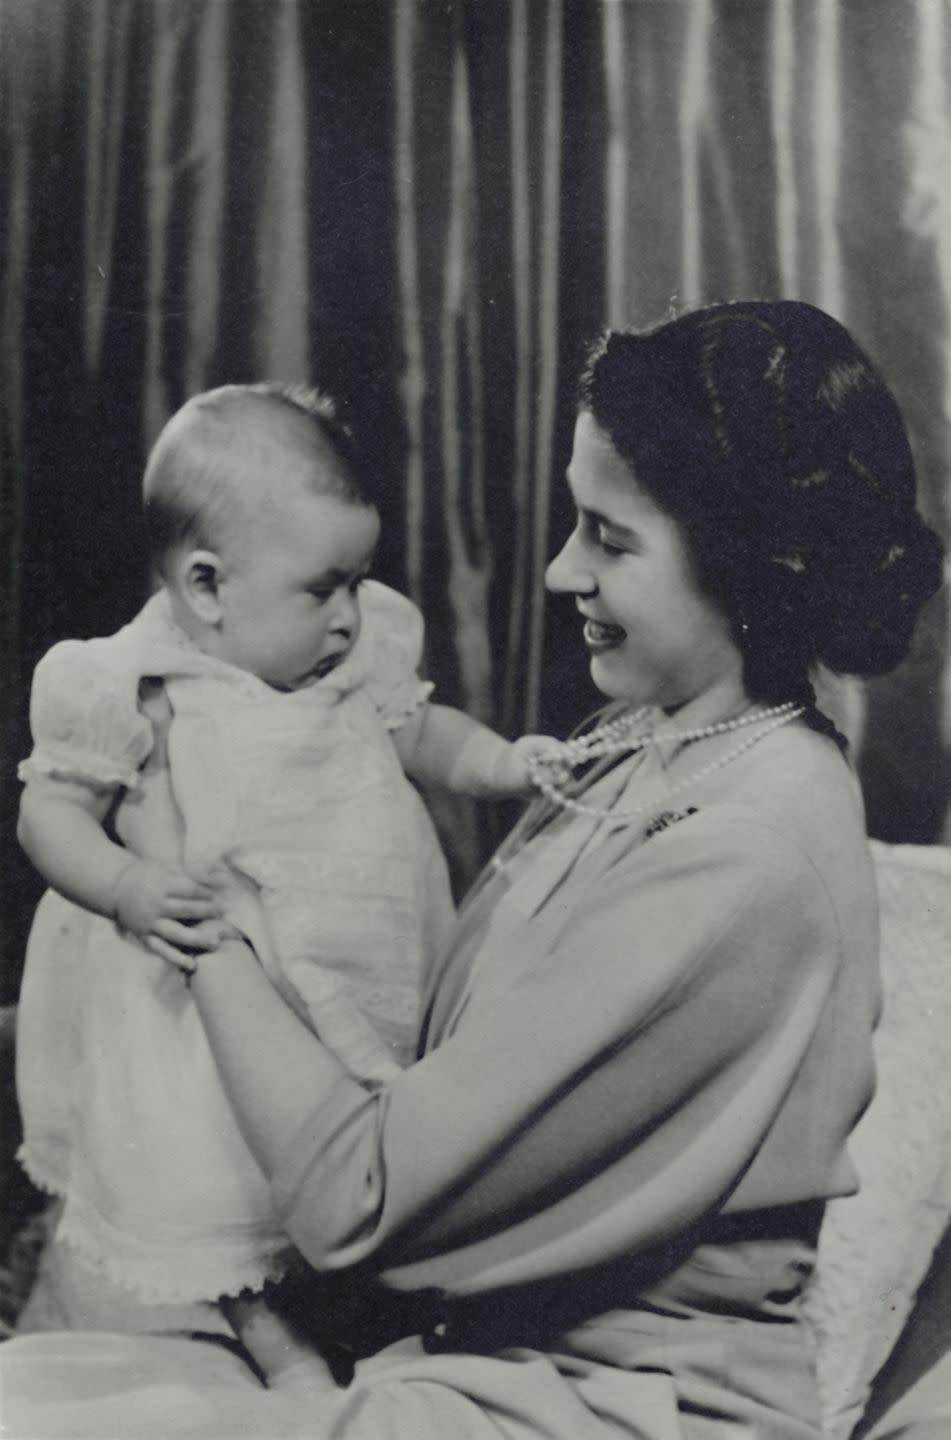 2) He was Buckingham Palace's first baby of the 20th century